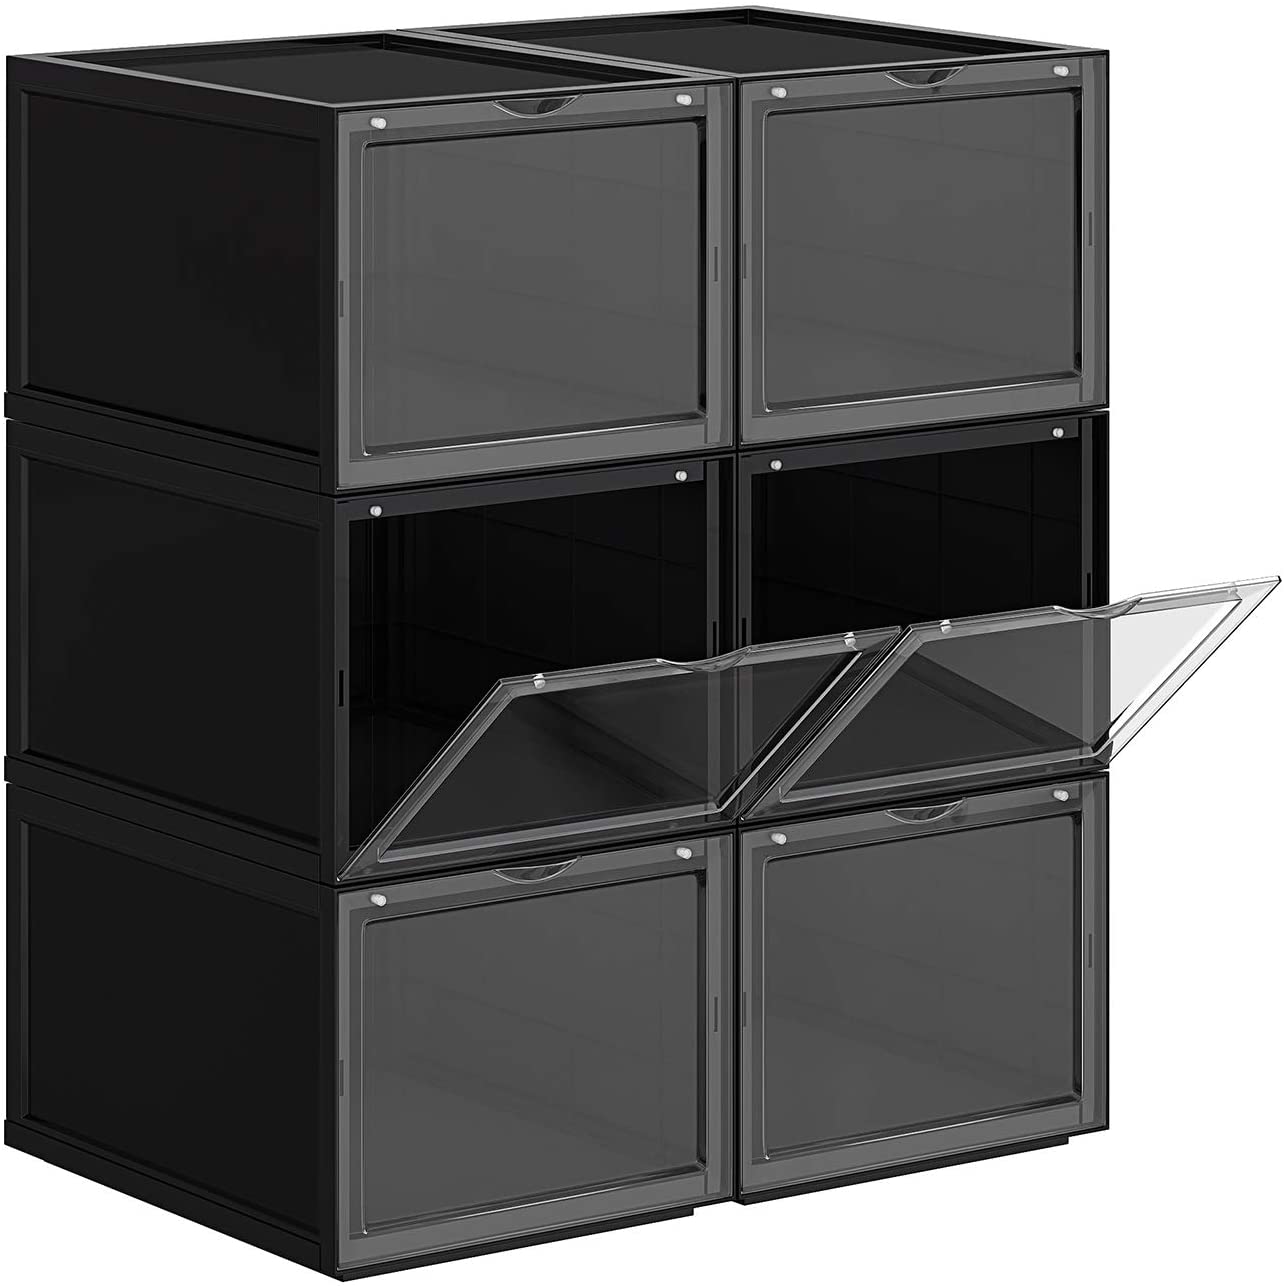 Shoe Box, Stackable Shoe Organiser, Plastic Shoe Storage with Clear Door, Easy to Assemble, Set of 6, 28 x 36 x 22 cm, Sizes up to UK 11, Black LSP06BK RAW58.dk 